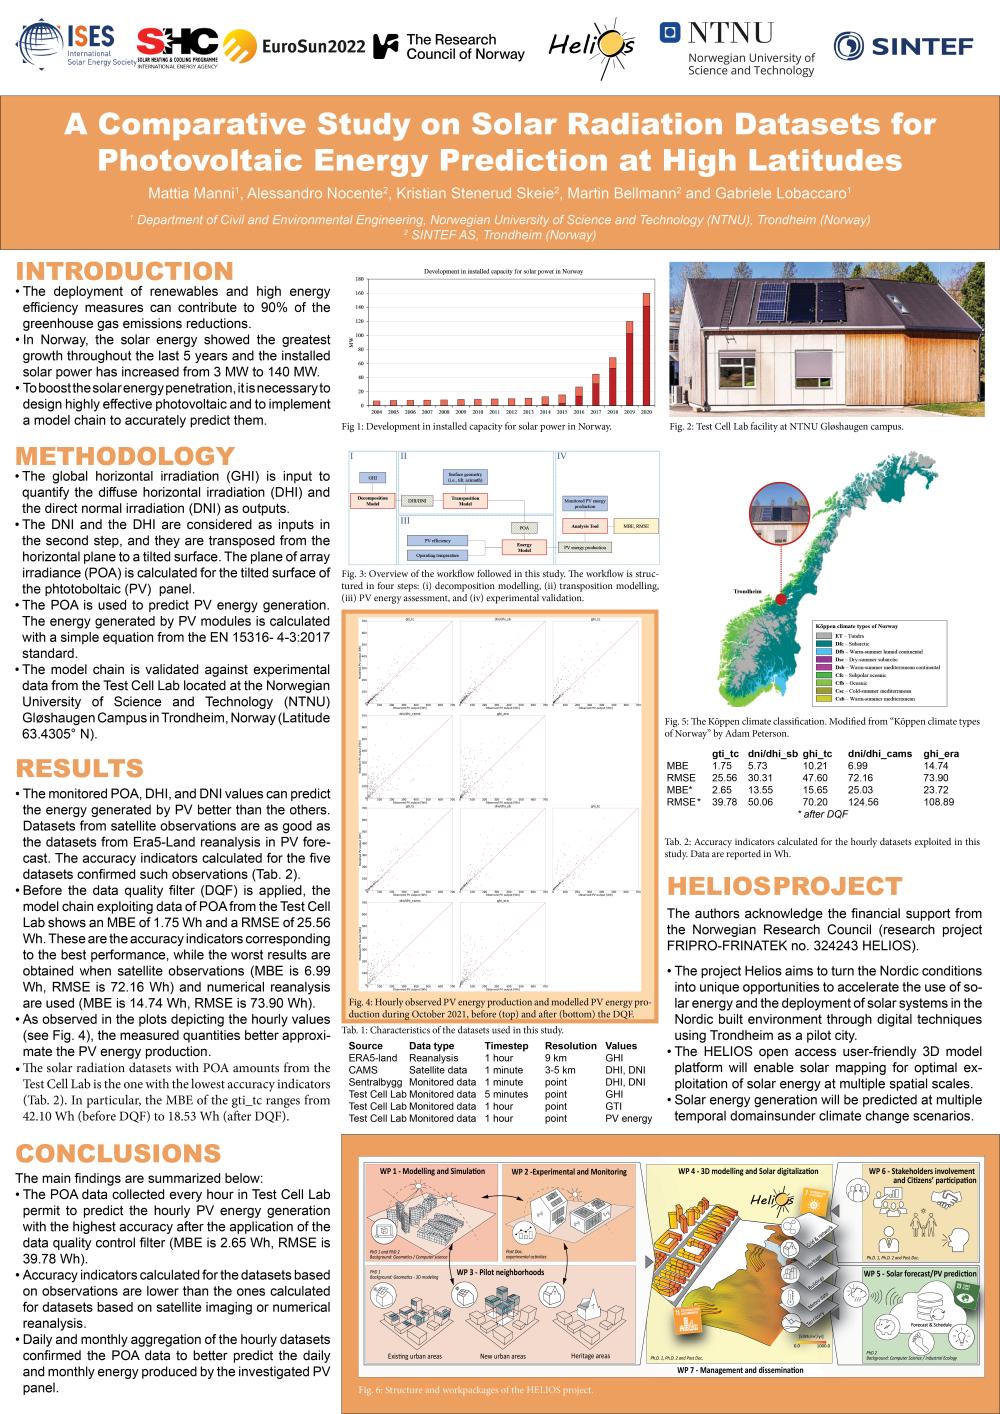 Poster A Comparative Study on Solar Radiation Datasets for Photovoltaic Energy Prediction at High Latitudes